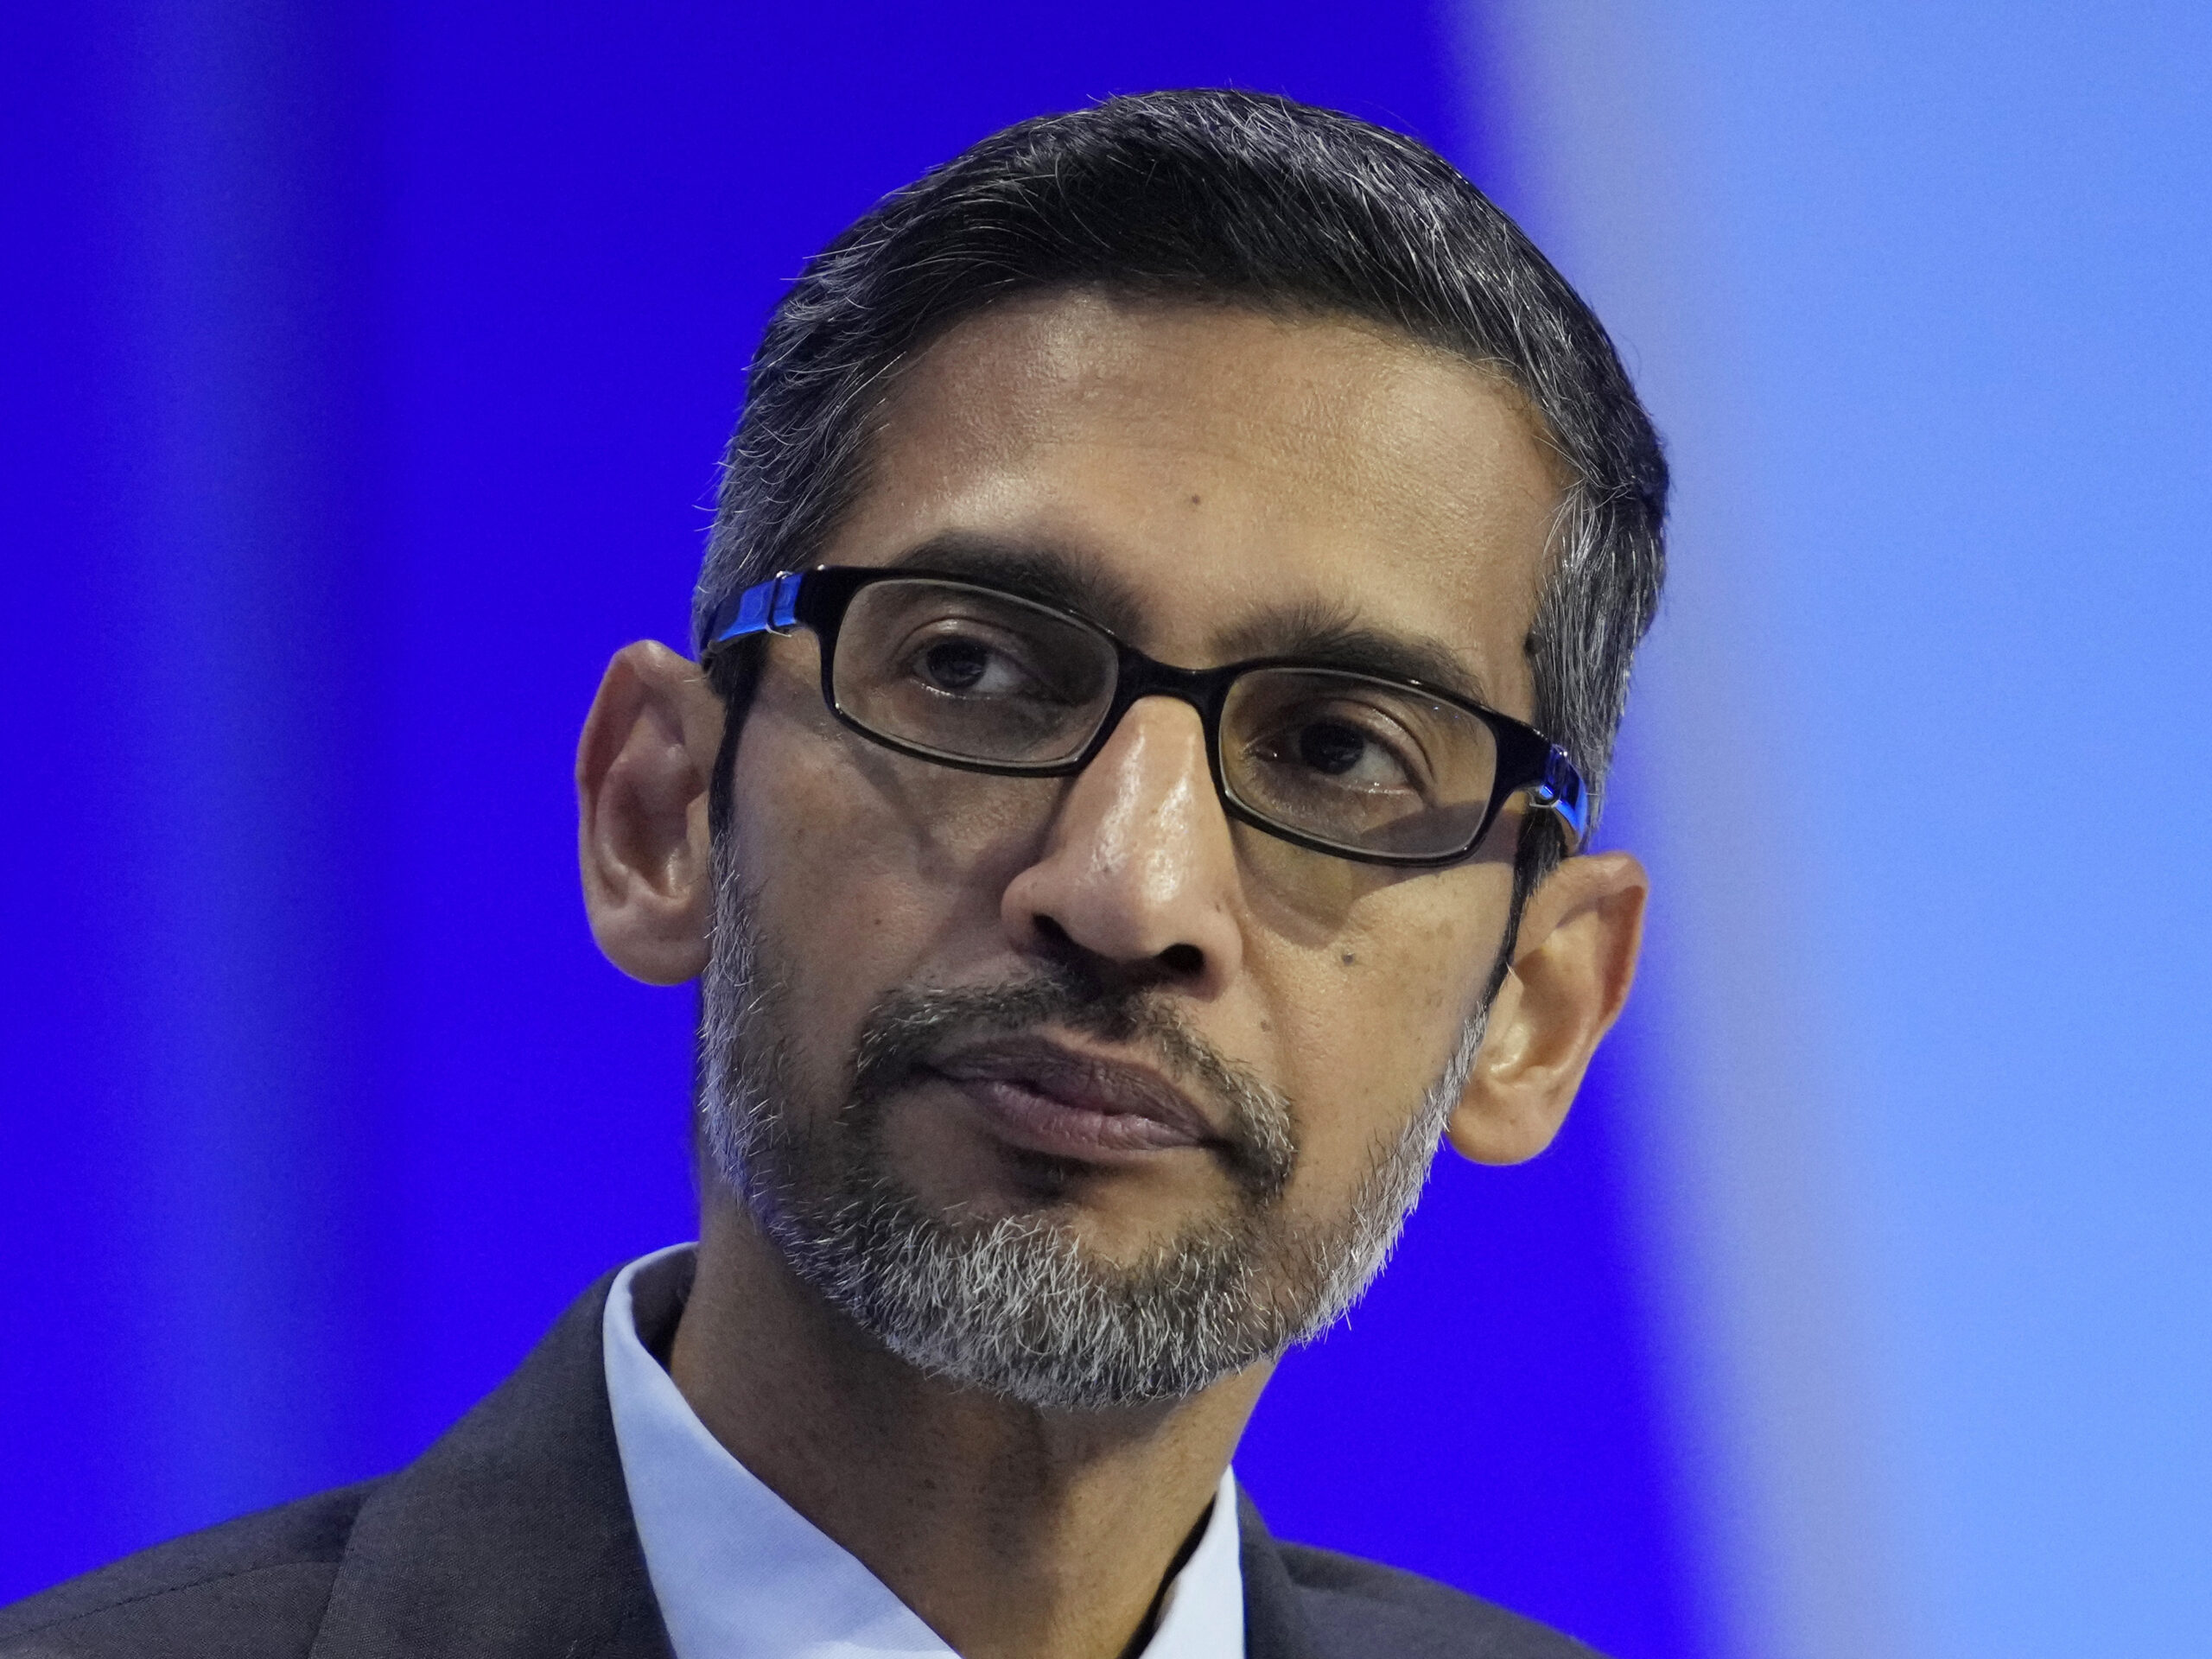 Google CEO Pichai says Gemini’s AI image results “offended our users”